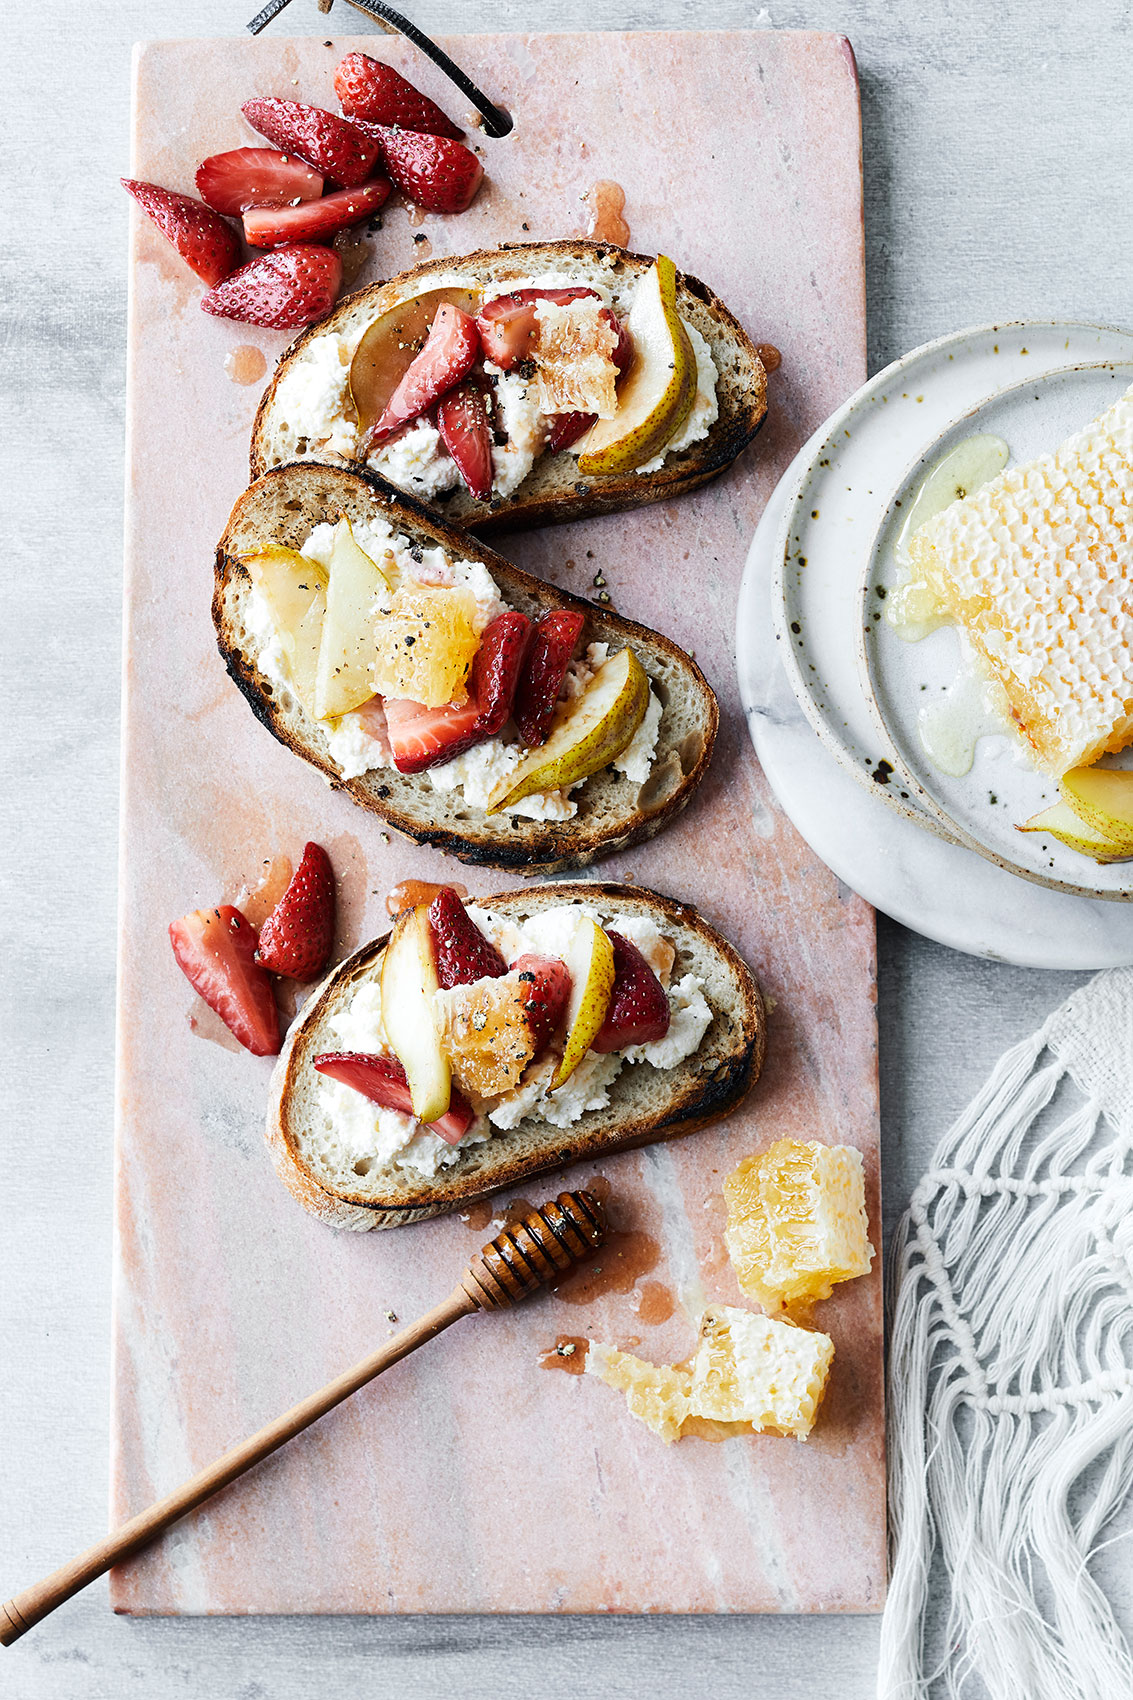 Strawberry Sourdough Sandwiches with Honey • Advertising & Editorial Food Photography